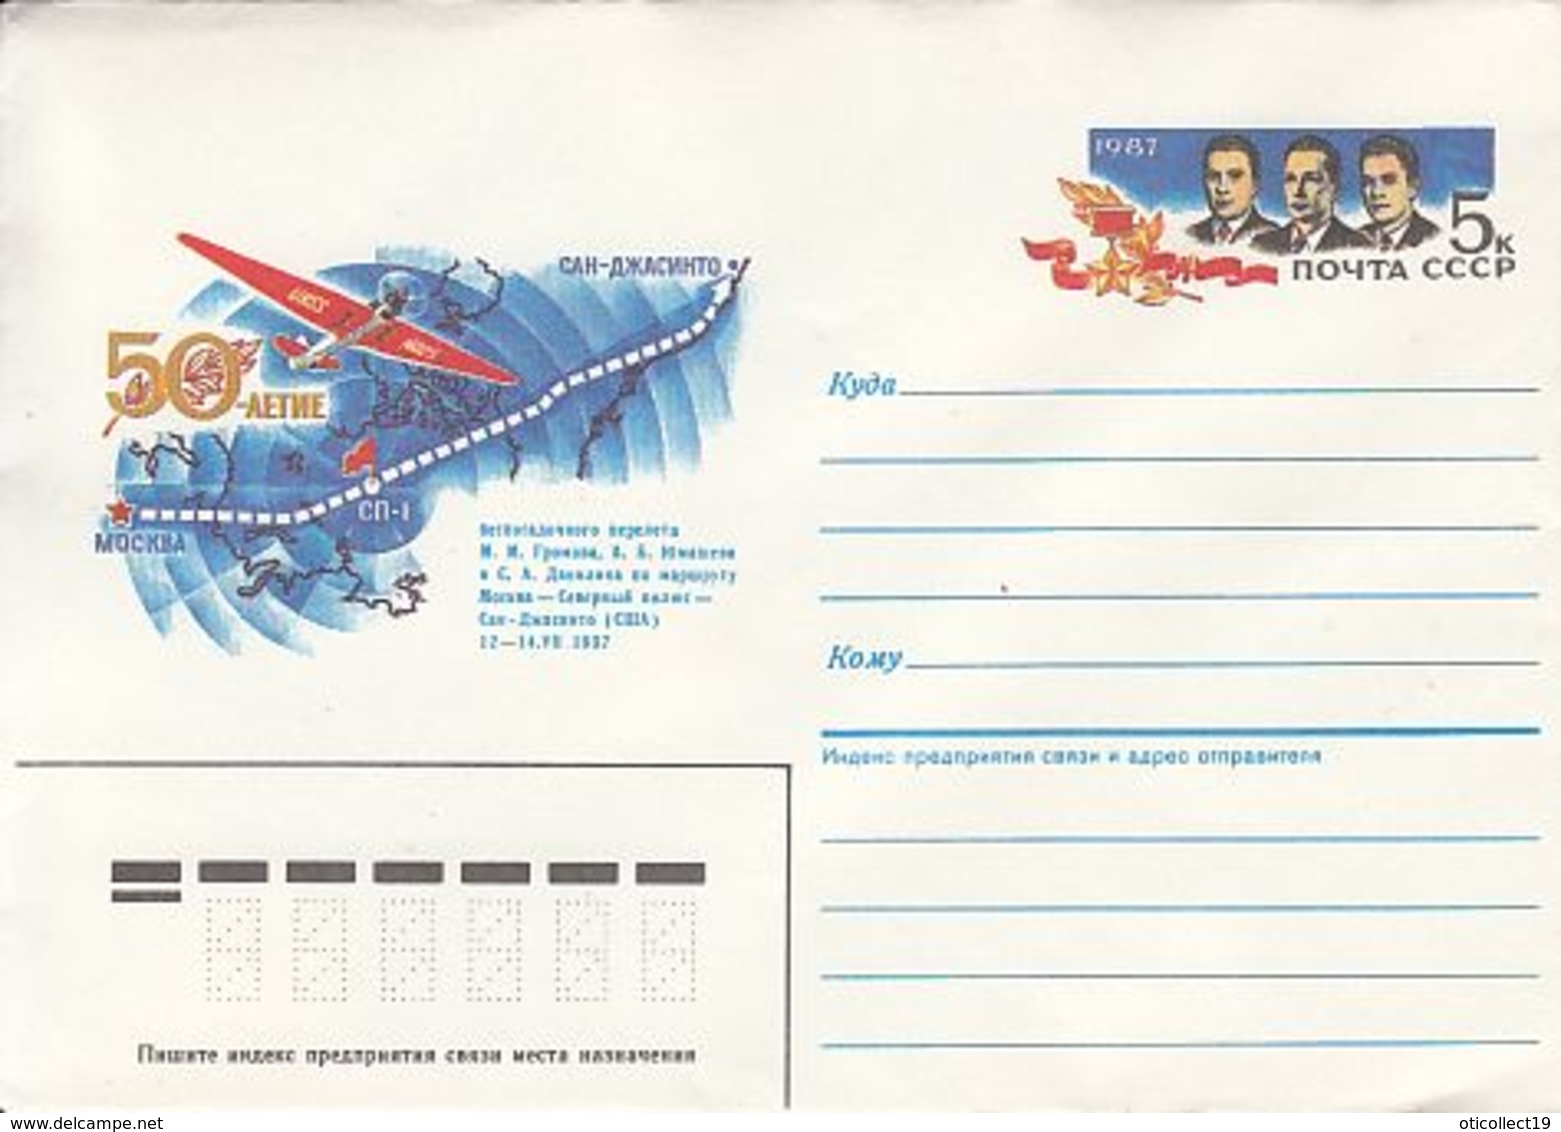 POLAR FLIGHTS, MOSCOW-SAN JACINTO FLIGHT OVER NORTH POLE, COVER STATIONERY, 1987, RUSSIA - Vuelos Polares